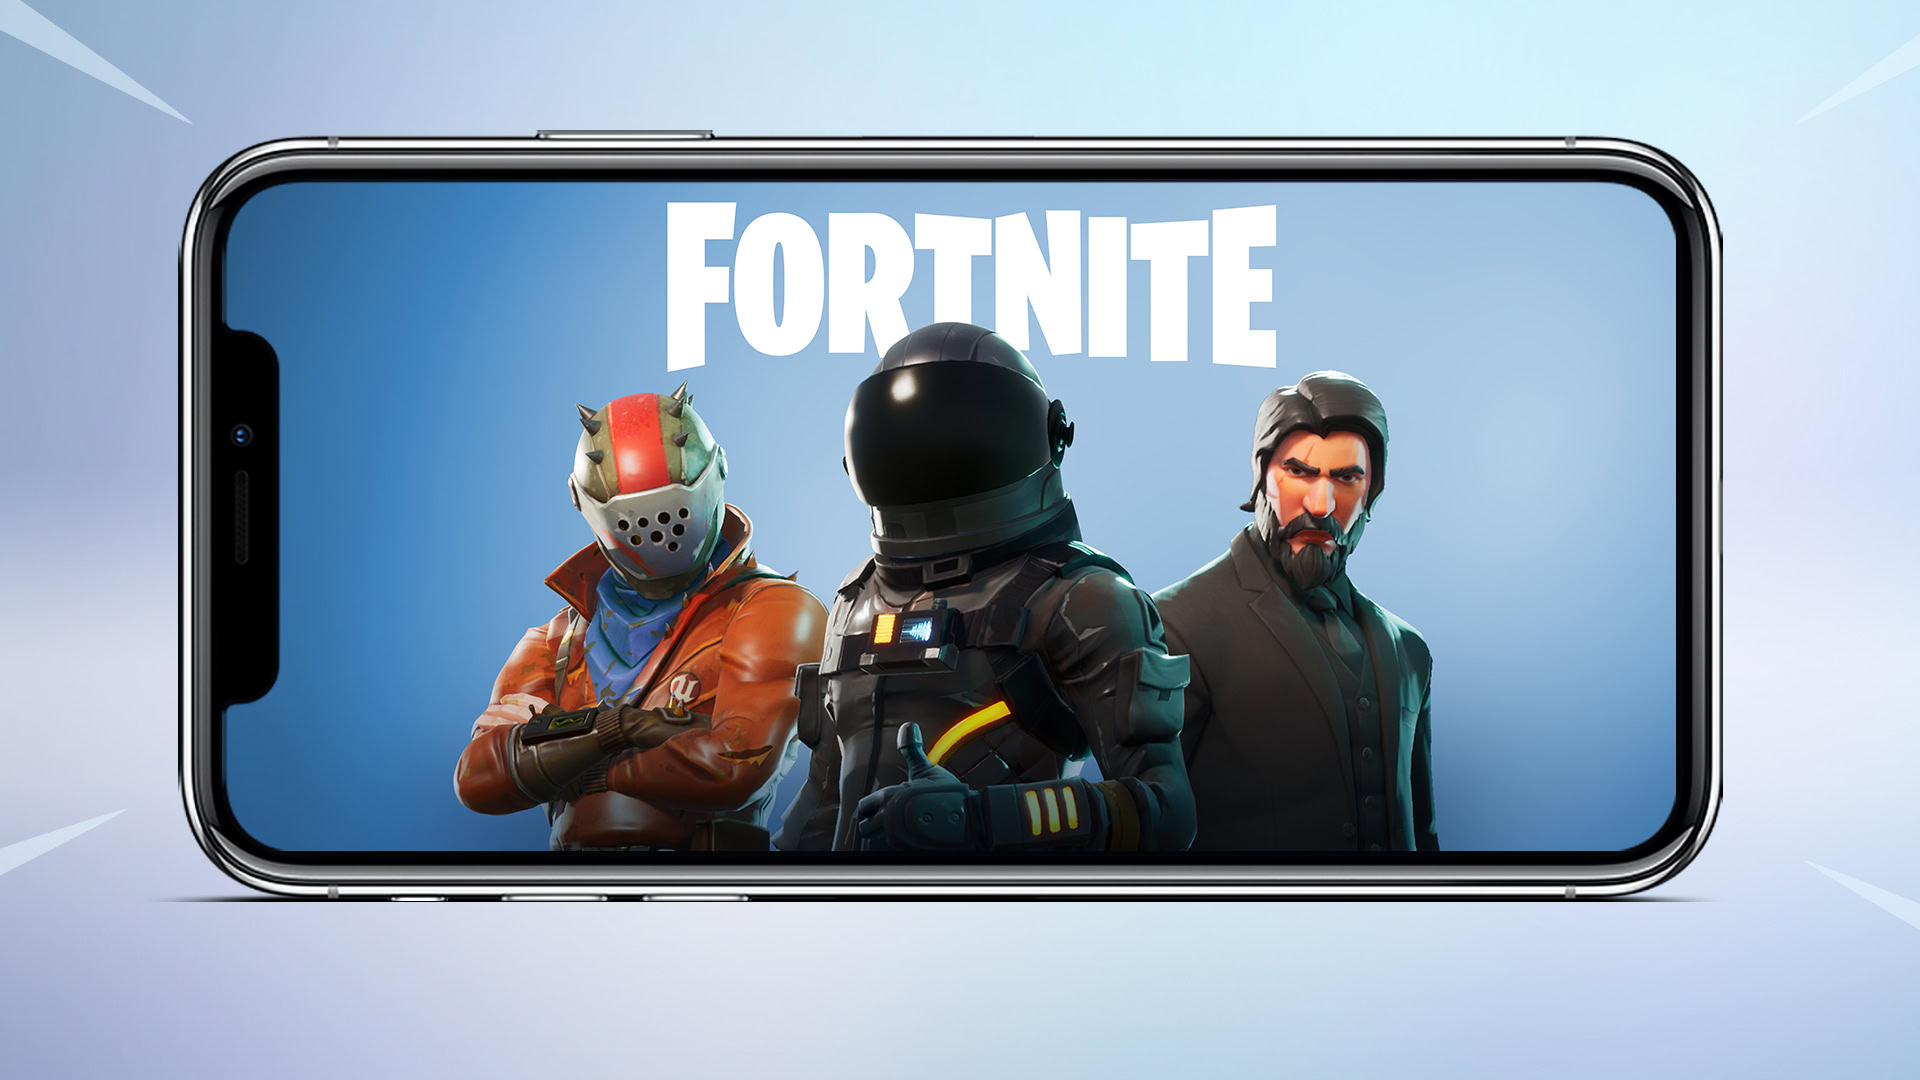 Fortnite Installer is now Epic Games app - Android Authority